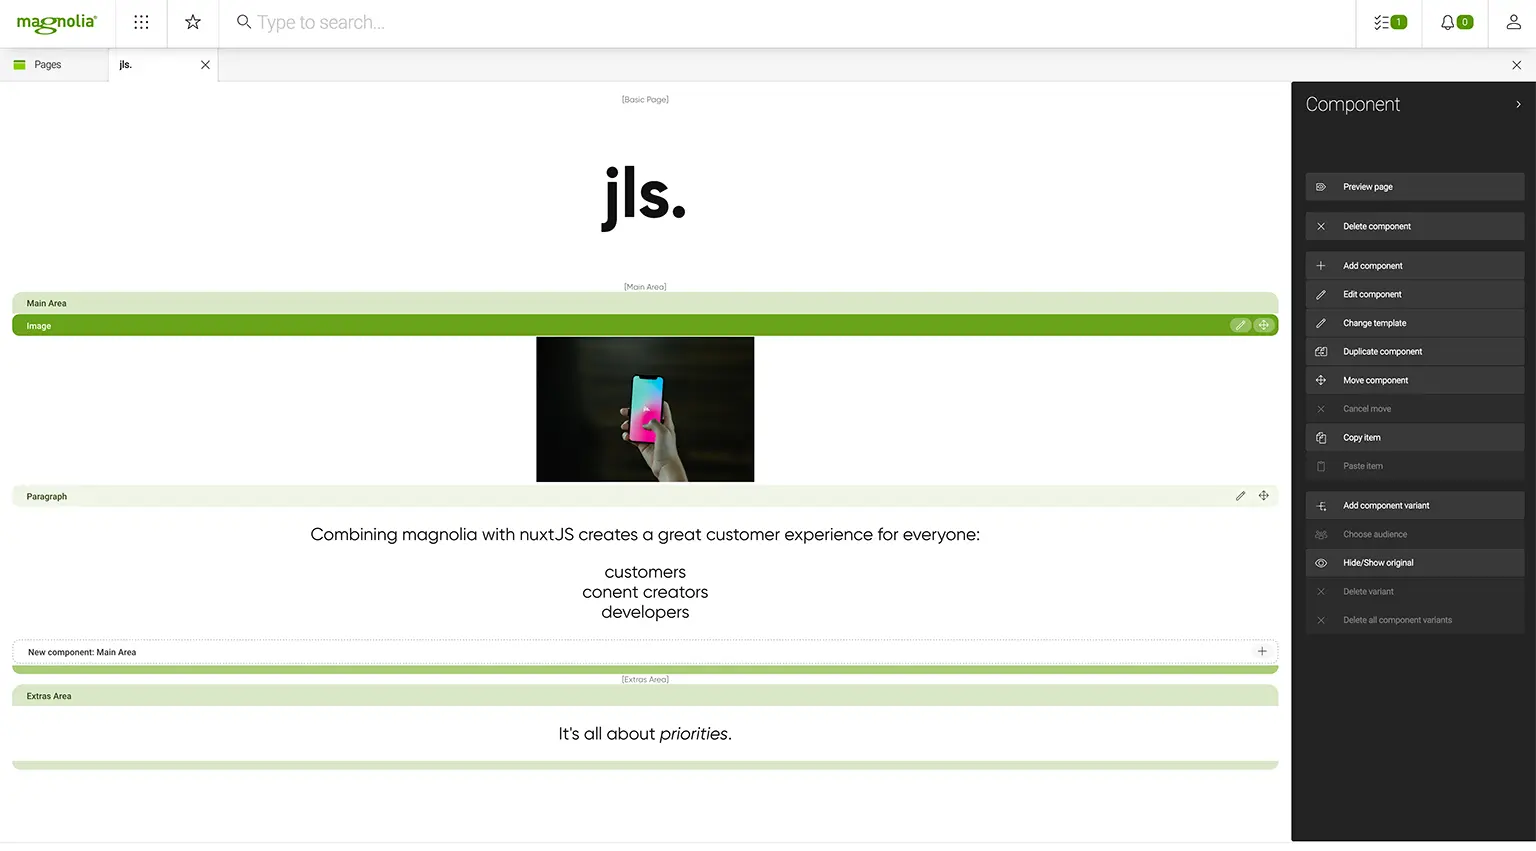 Screenshot from the Magnolia CMS with clicked image component